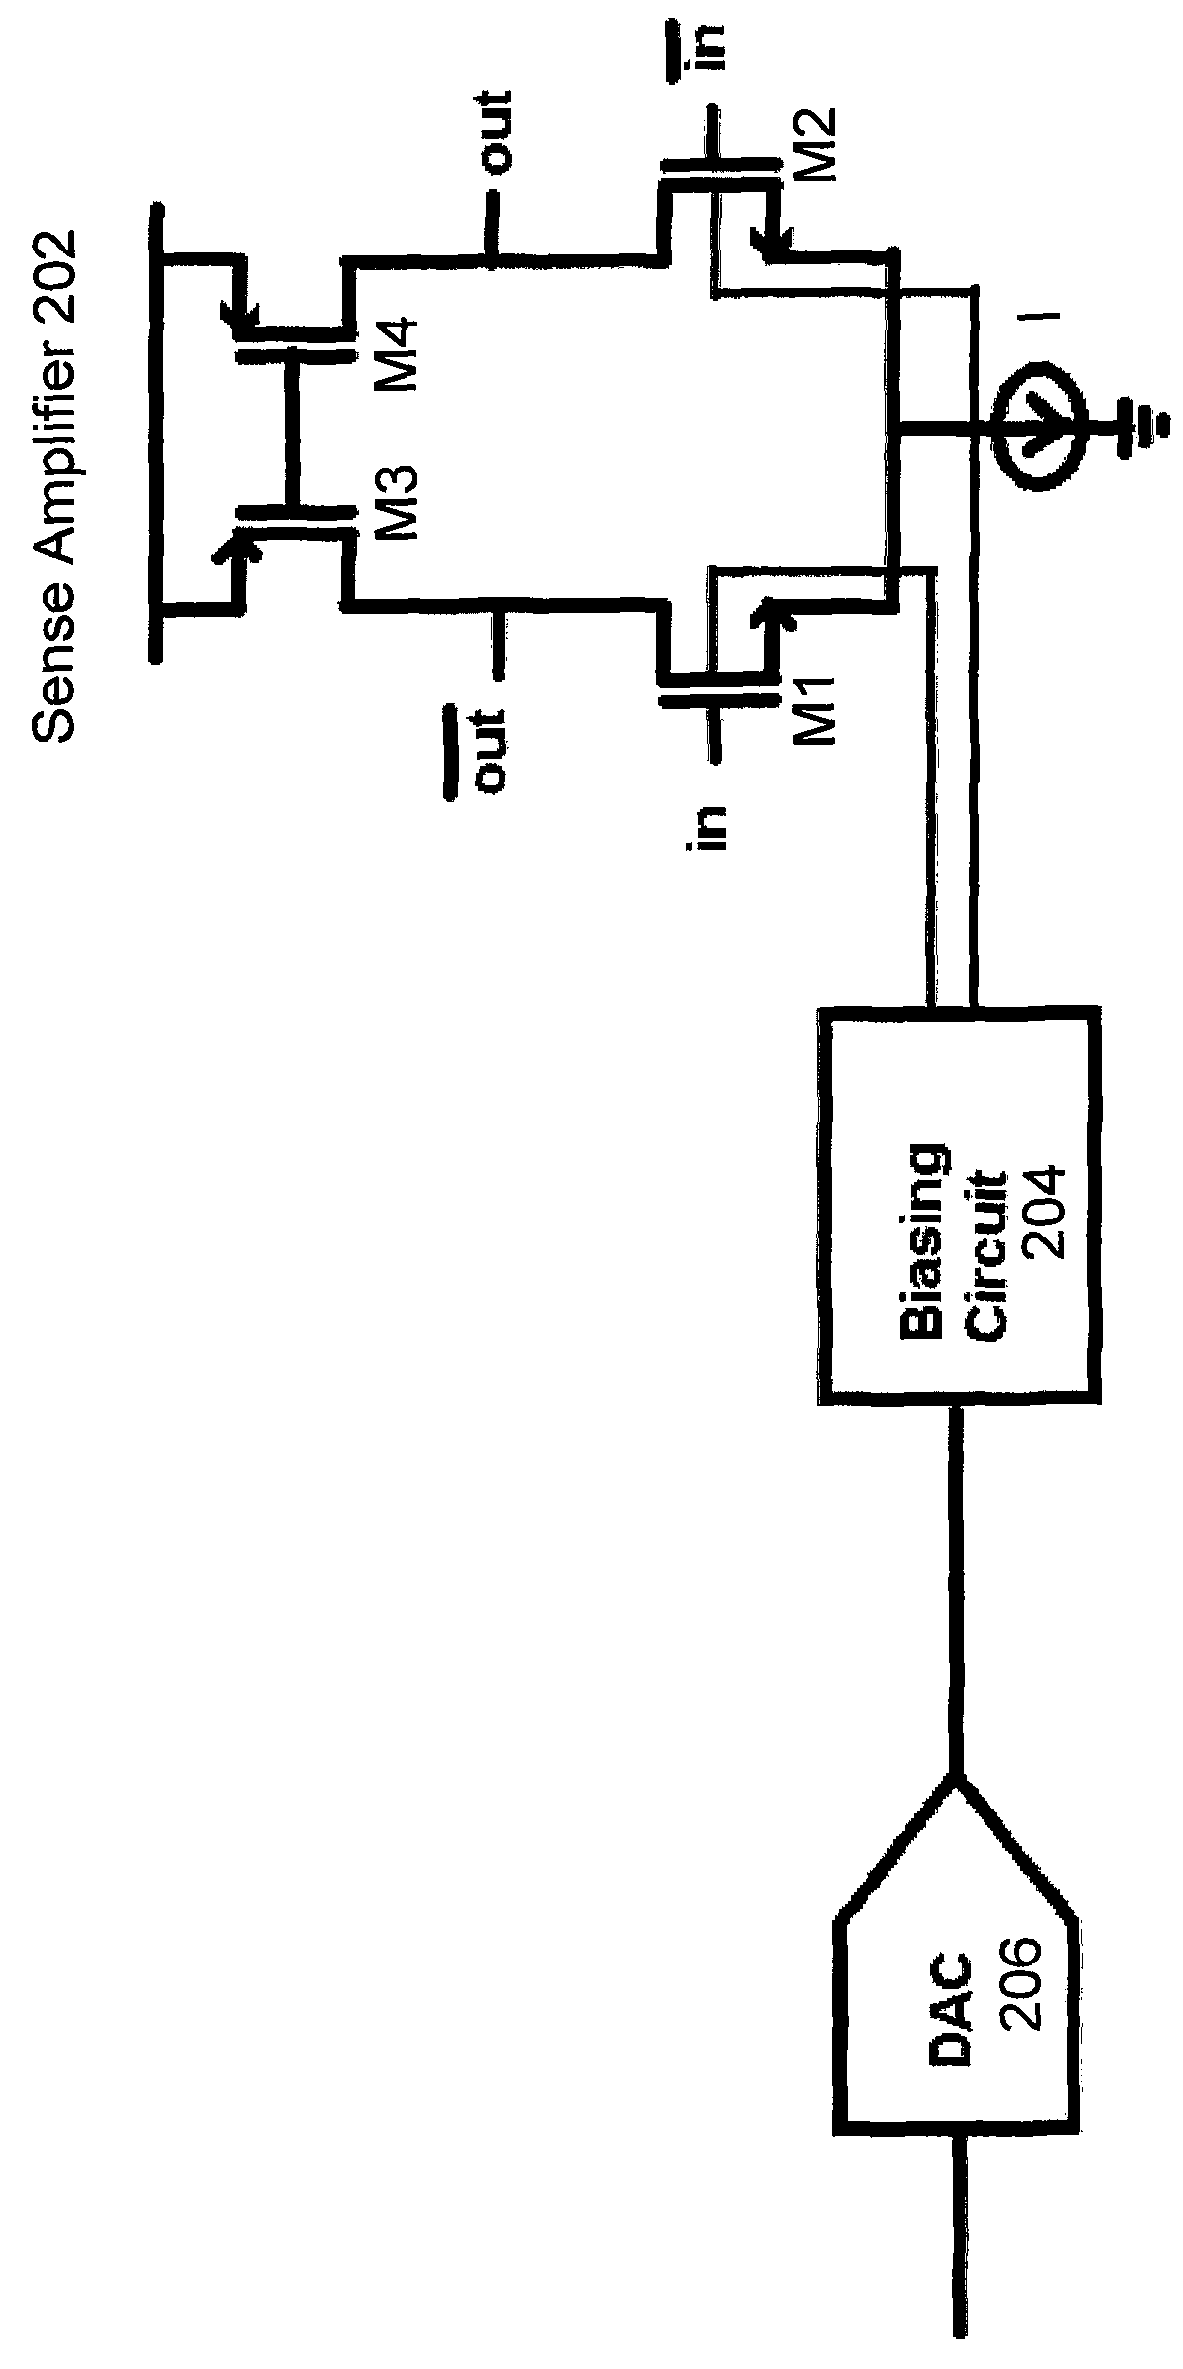 Apparatus and method for sense amplifier offset cancellation